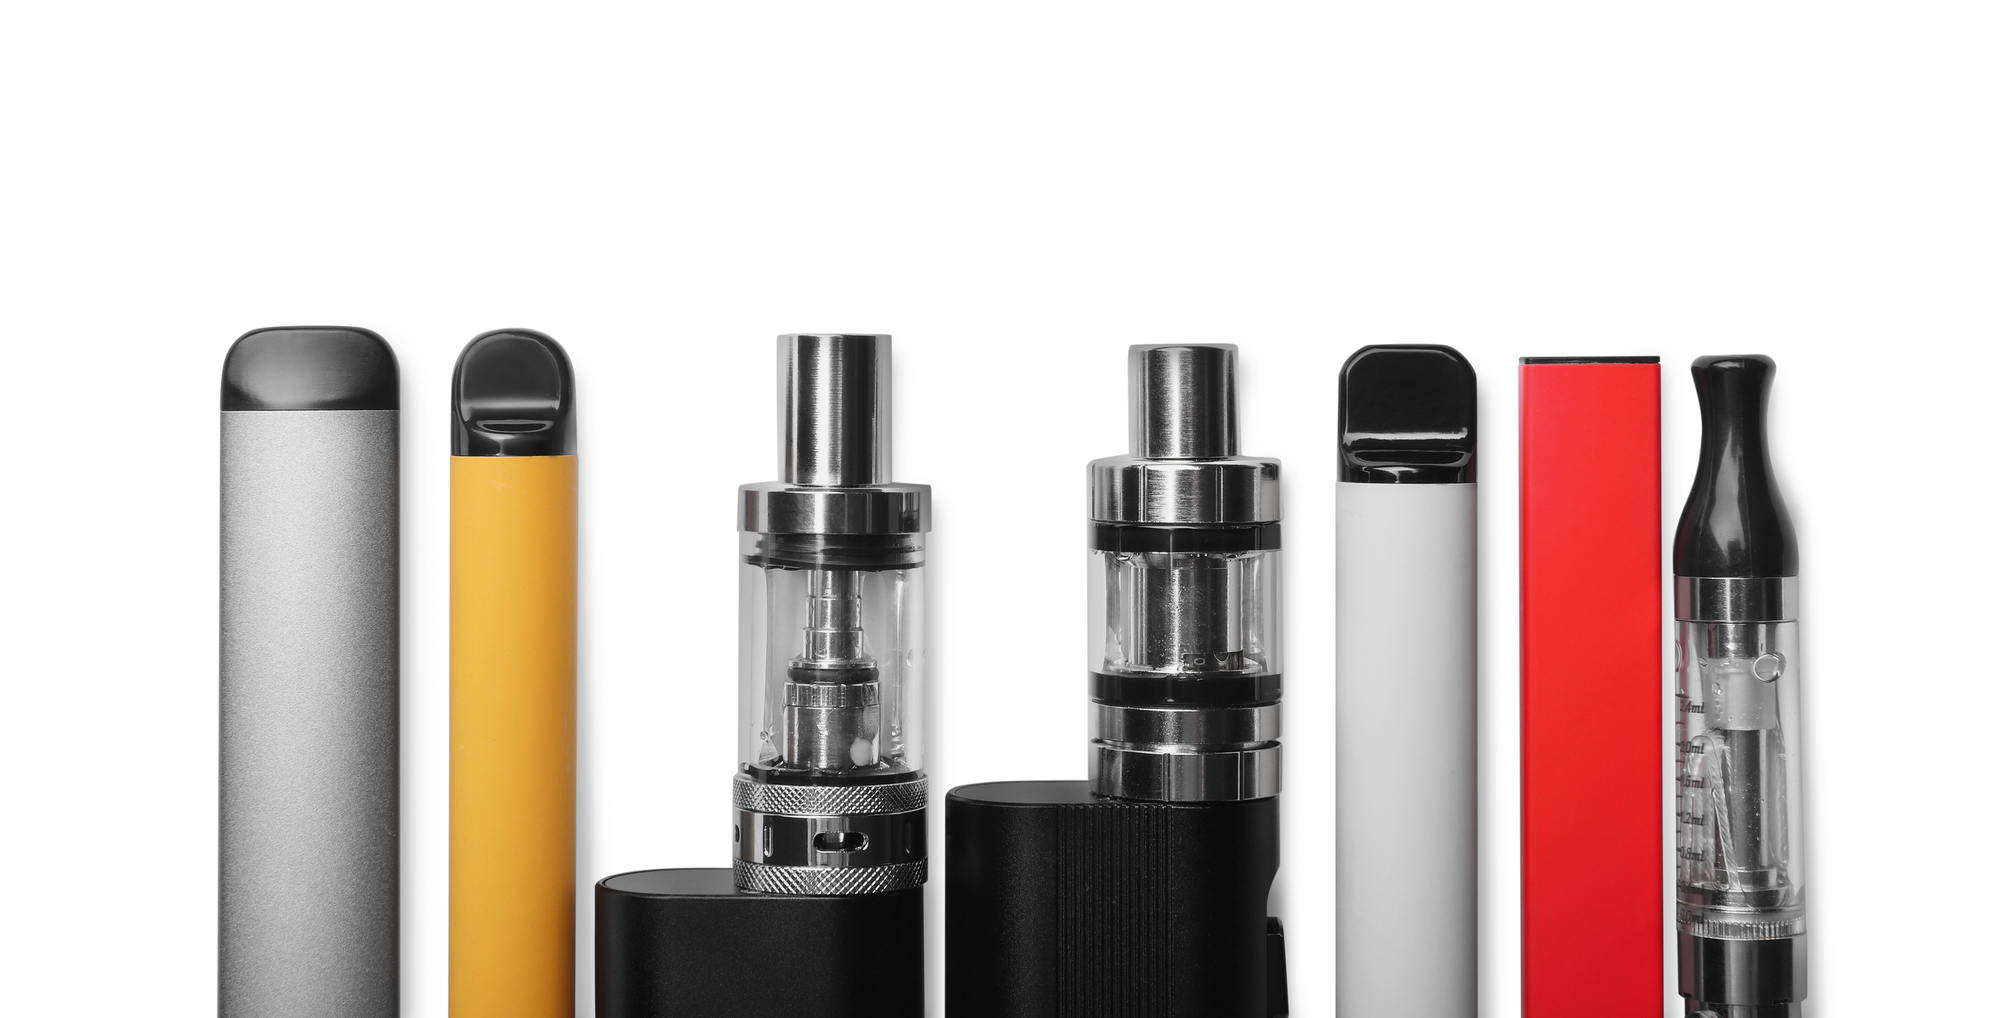 Dab Pen VS Cart, what is the difference between a dab pen vs cart